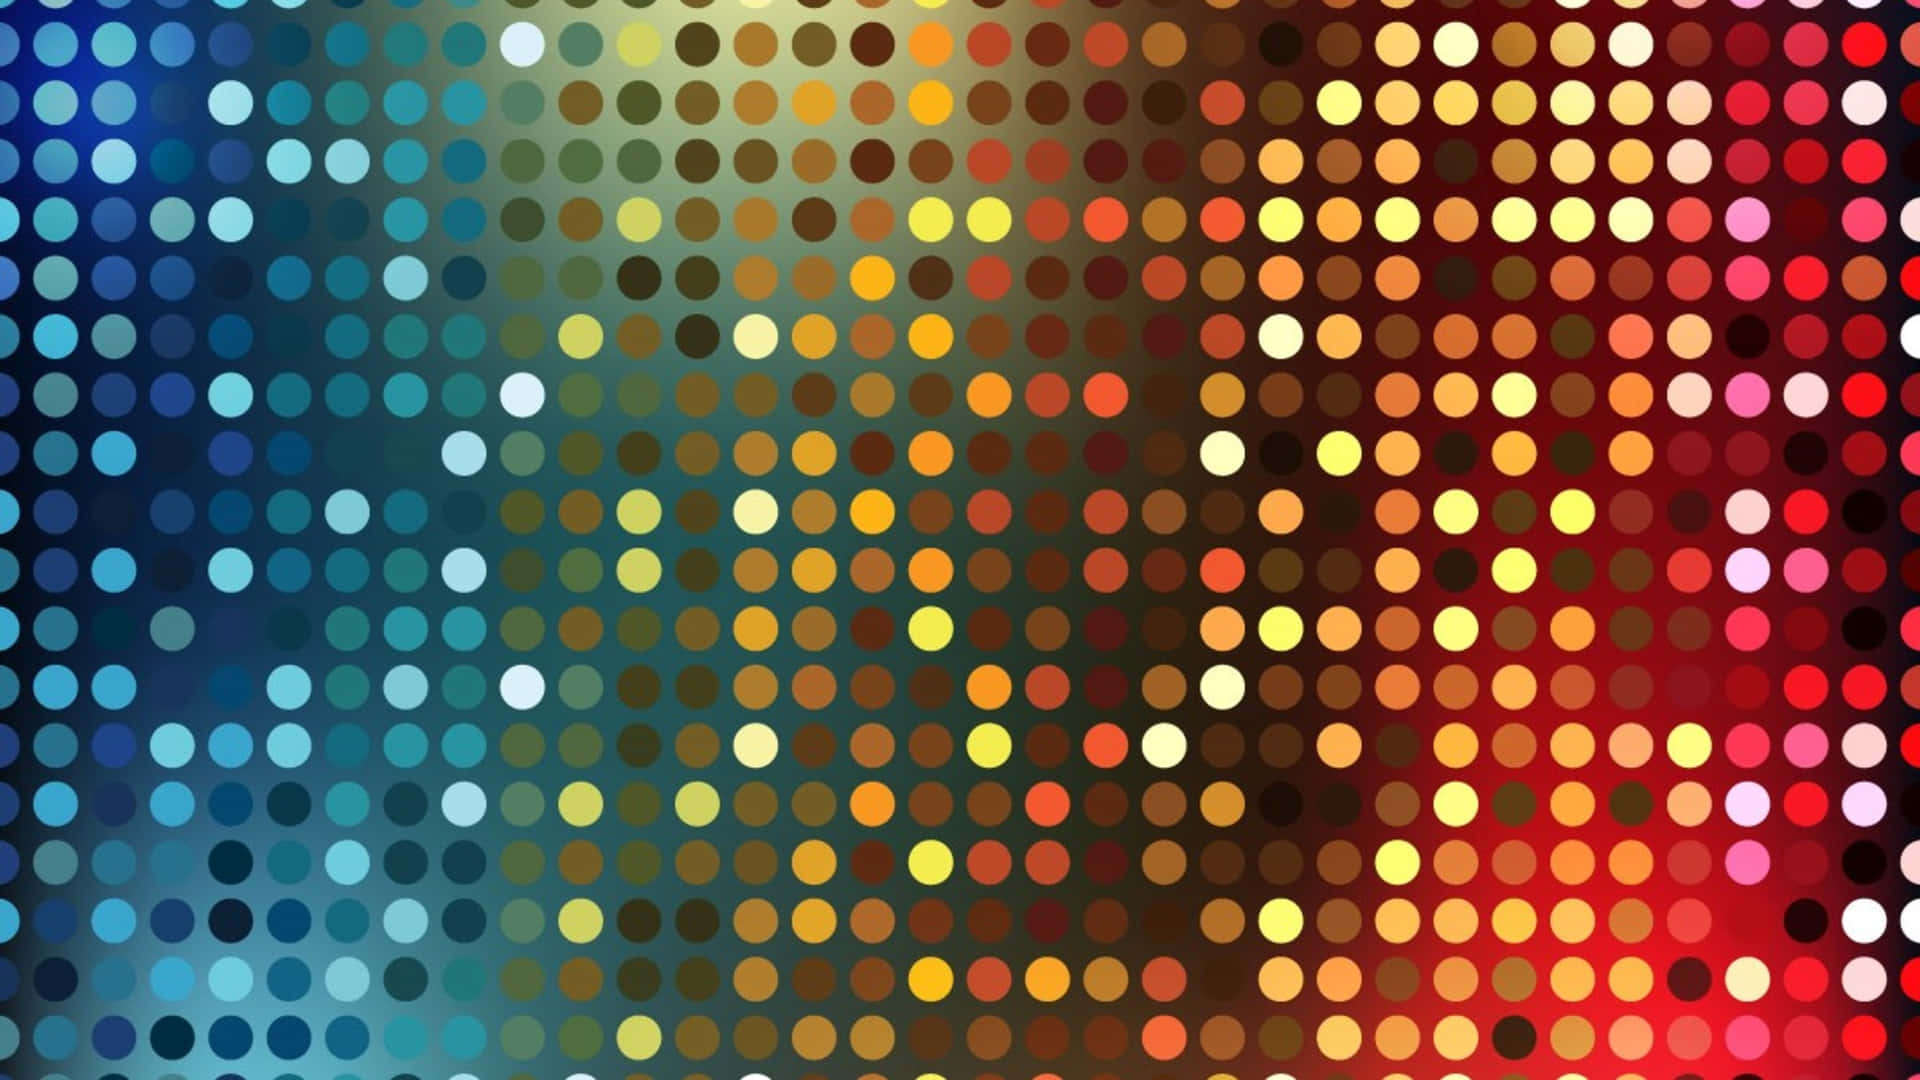 A Colorful Background With Dots